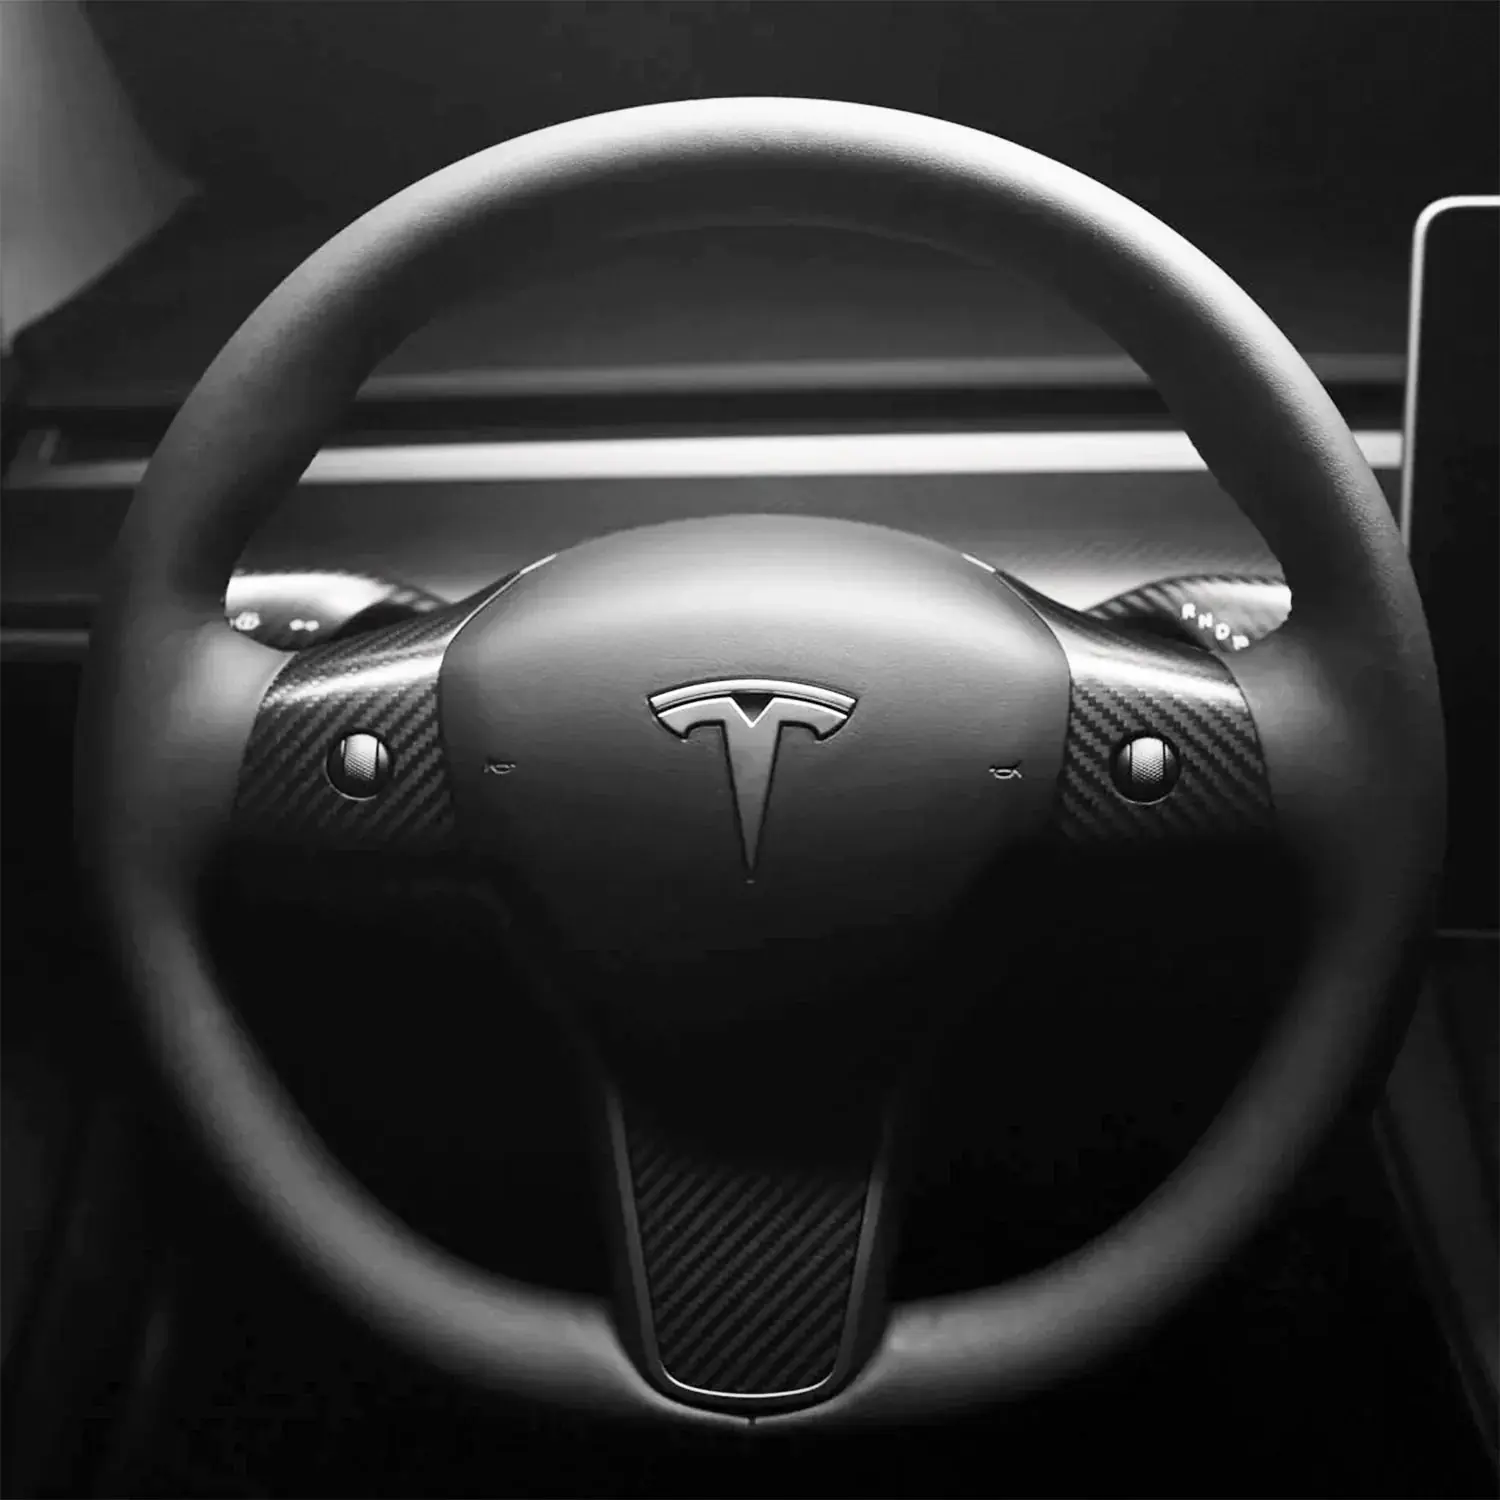 Upgrade Your Tesla's Interior with Adreama Real Carbon Fiber Steering Wheel Accents